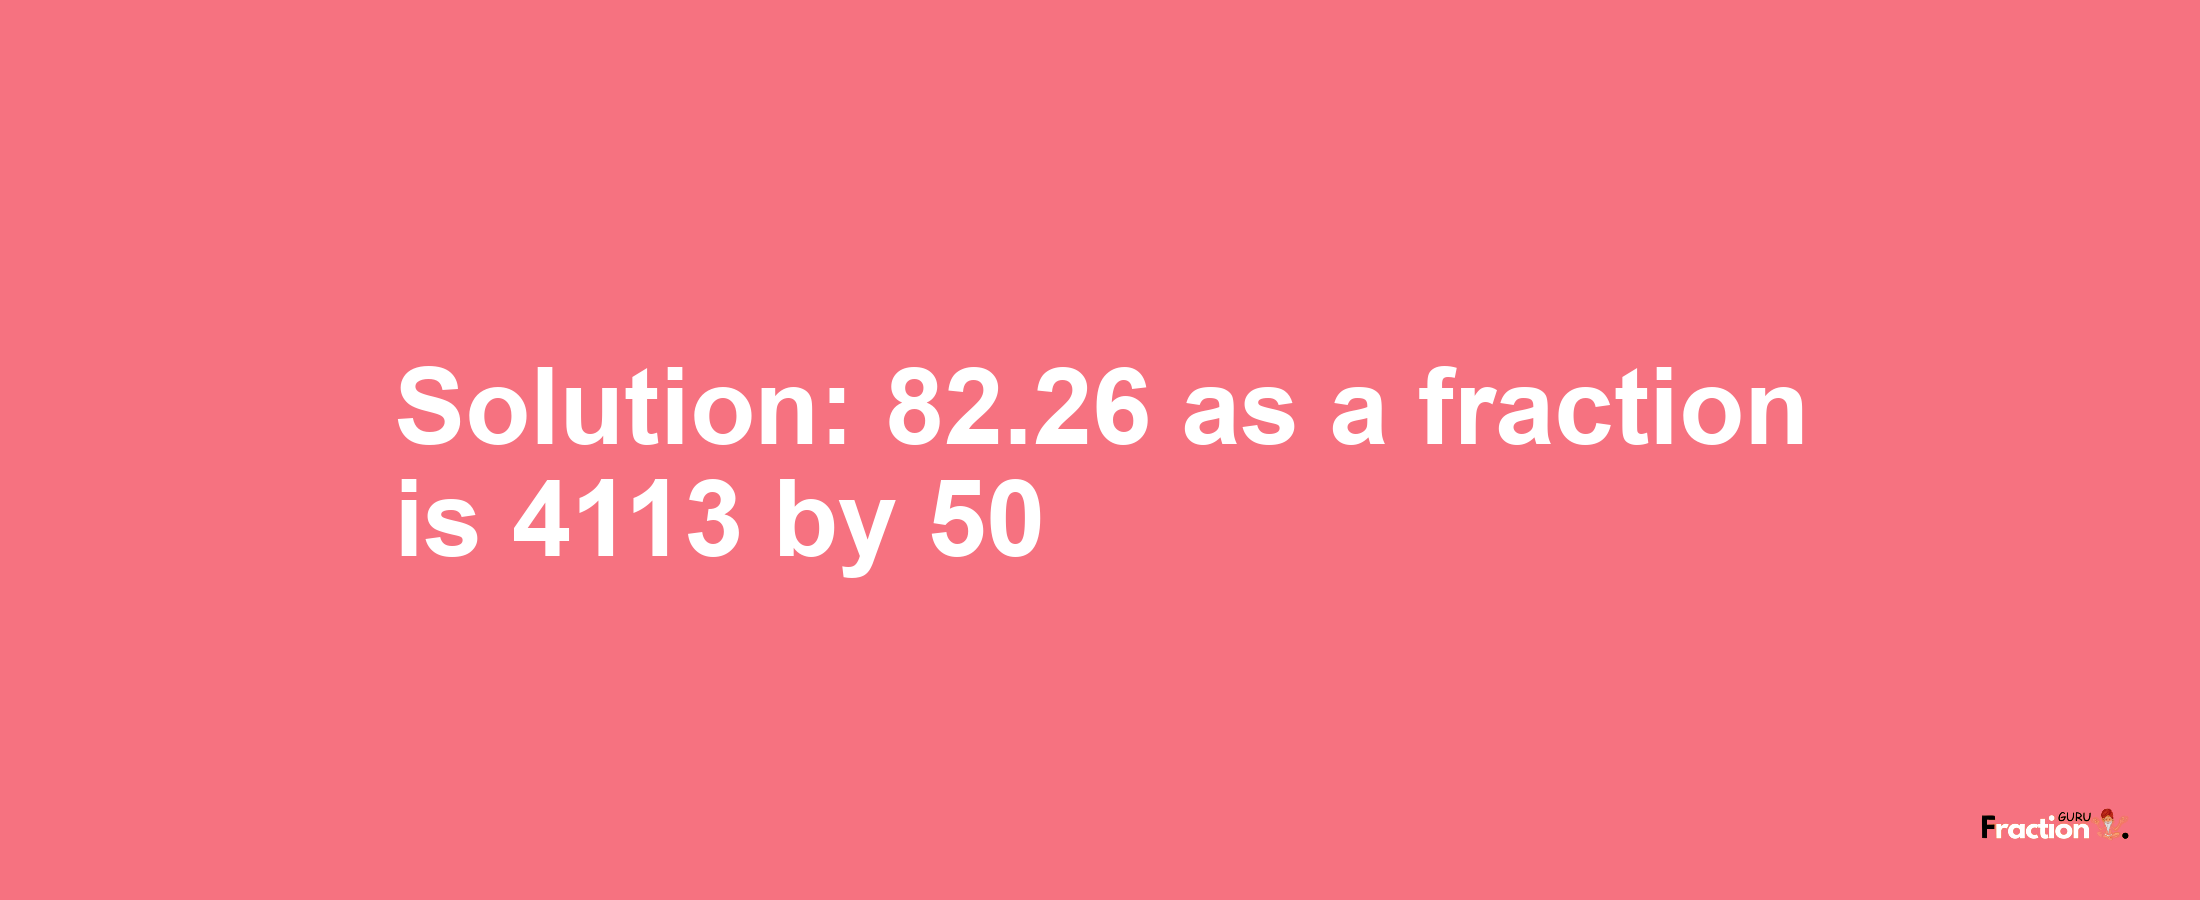 Solution:82.26 as a fraction is 4113/50